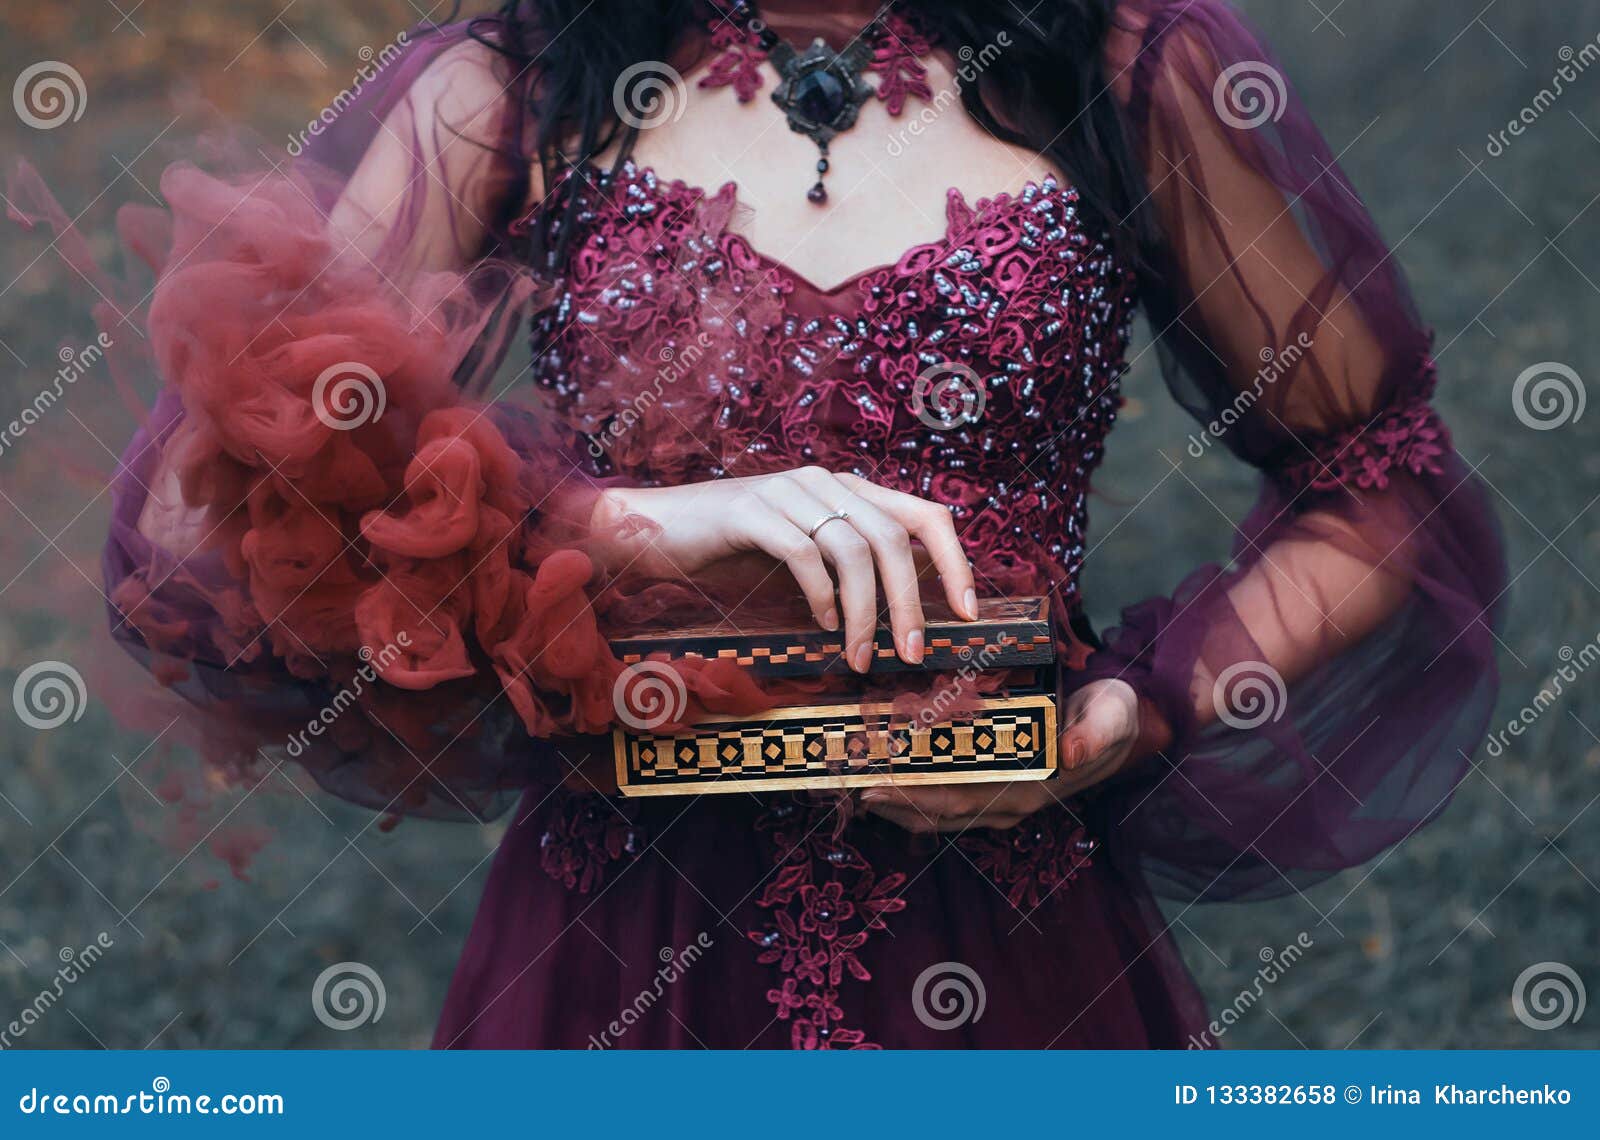 Legend Of Pandora S Box Girl With Black Hair Dressed In A Purple Luxurious Gorgeous Dress An Antique Casket Opened Stock Photo Image Of Evil Greek 133382658